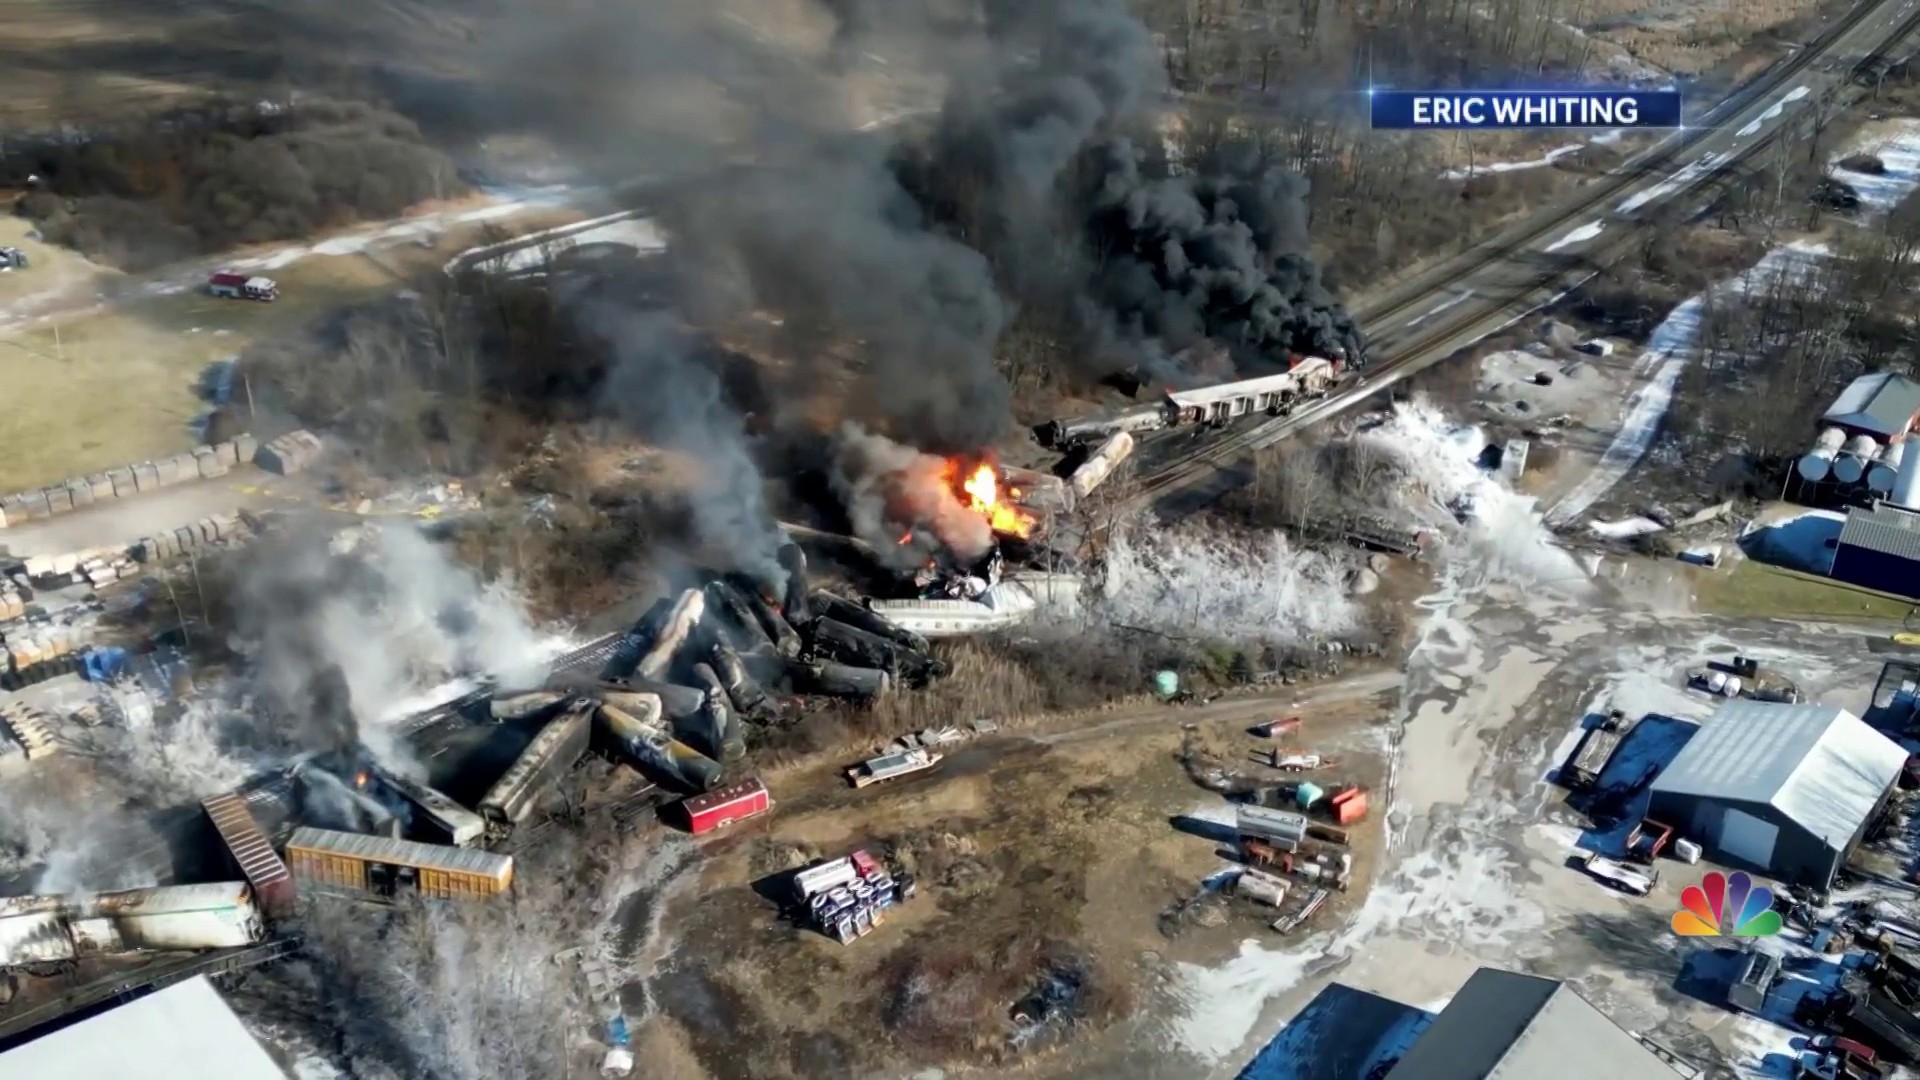 Ohio train derailment prompts controlled release of chemicals on board